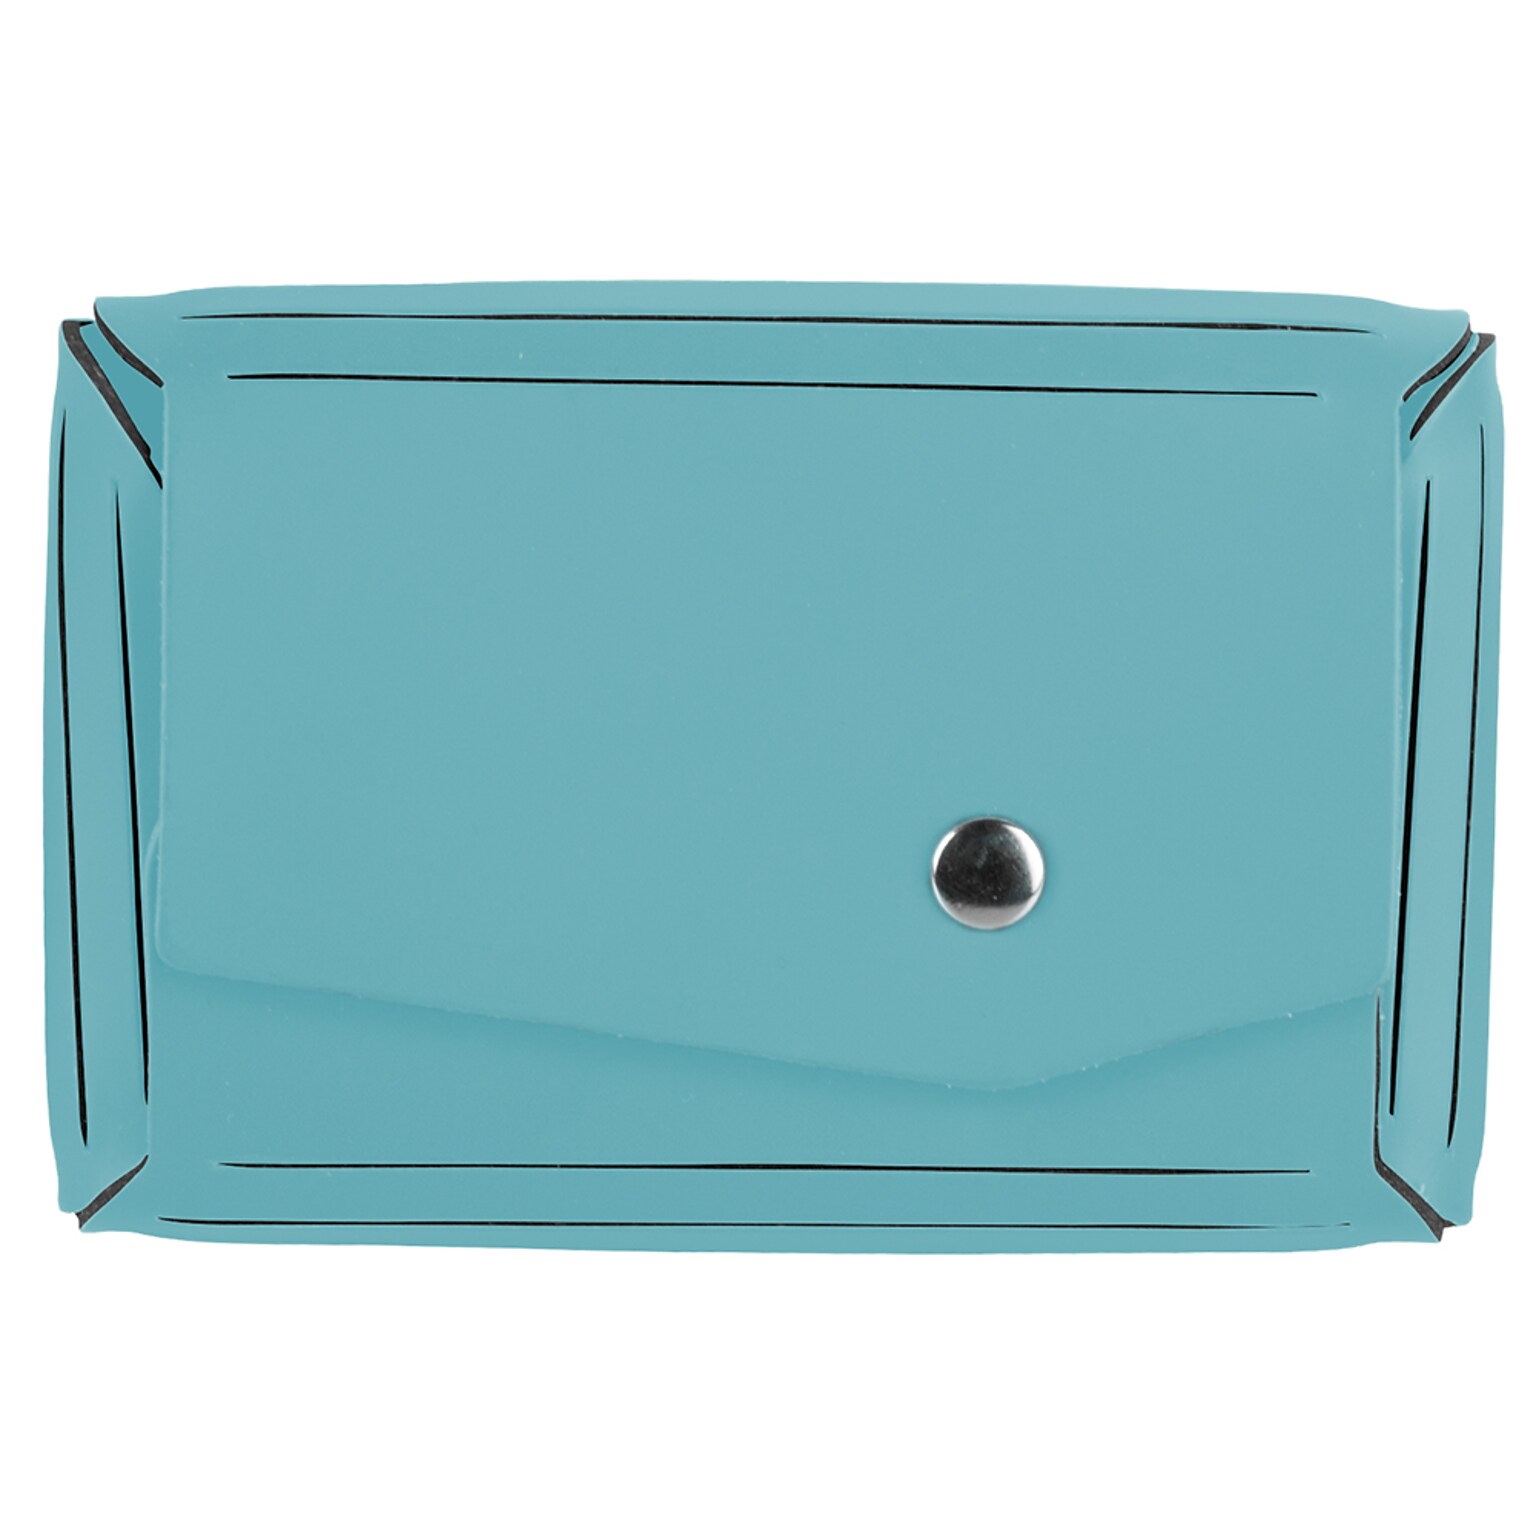 JAM Paper® Italian Leather Business Card Holder Case with Angular Flap, Teal Blue, Sold Individually (233329916)